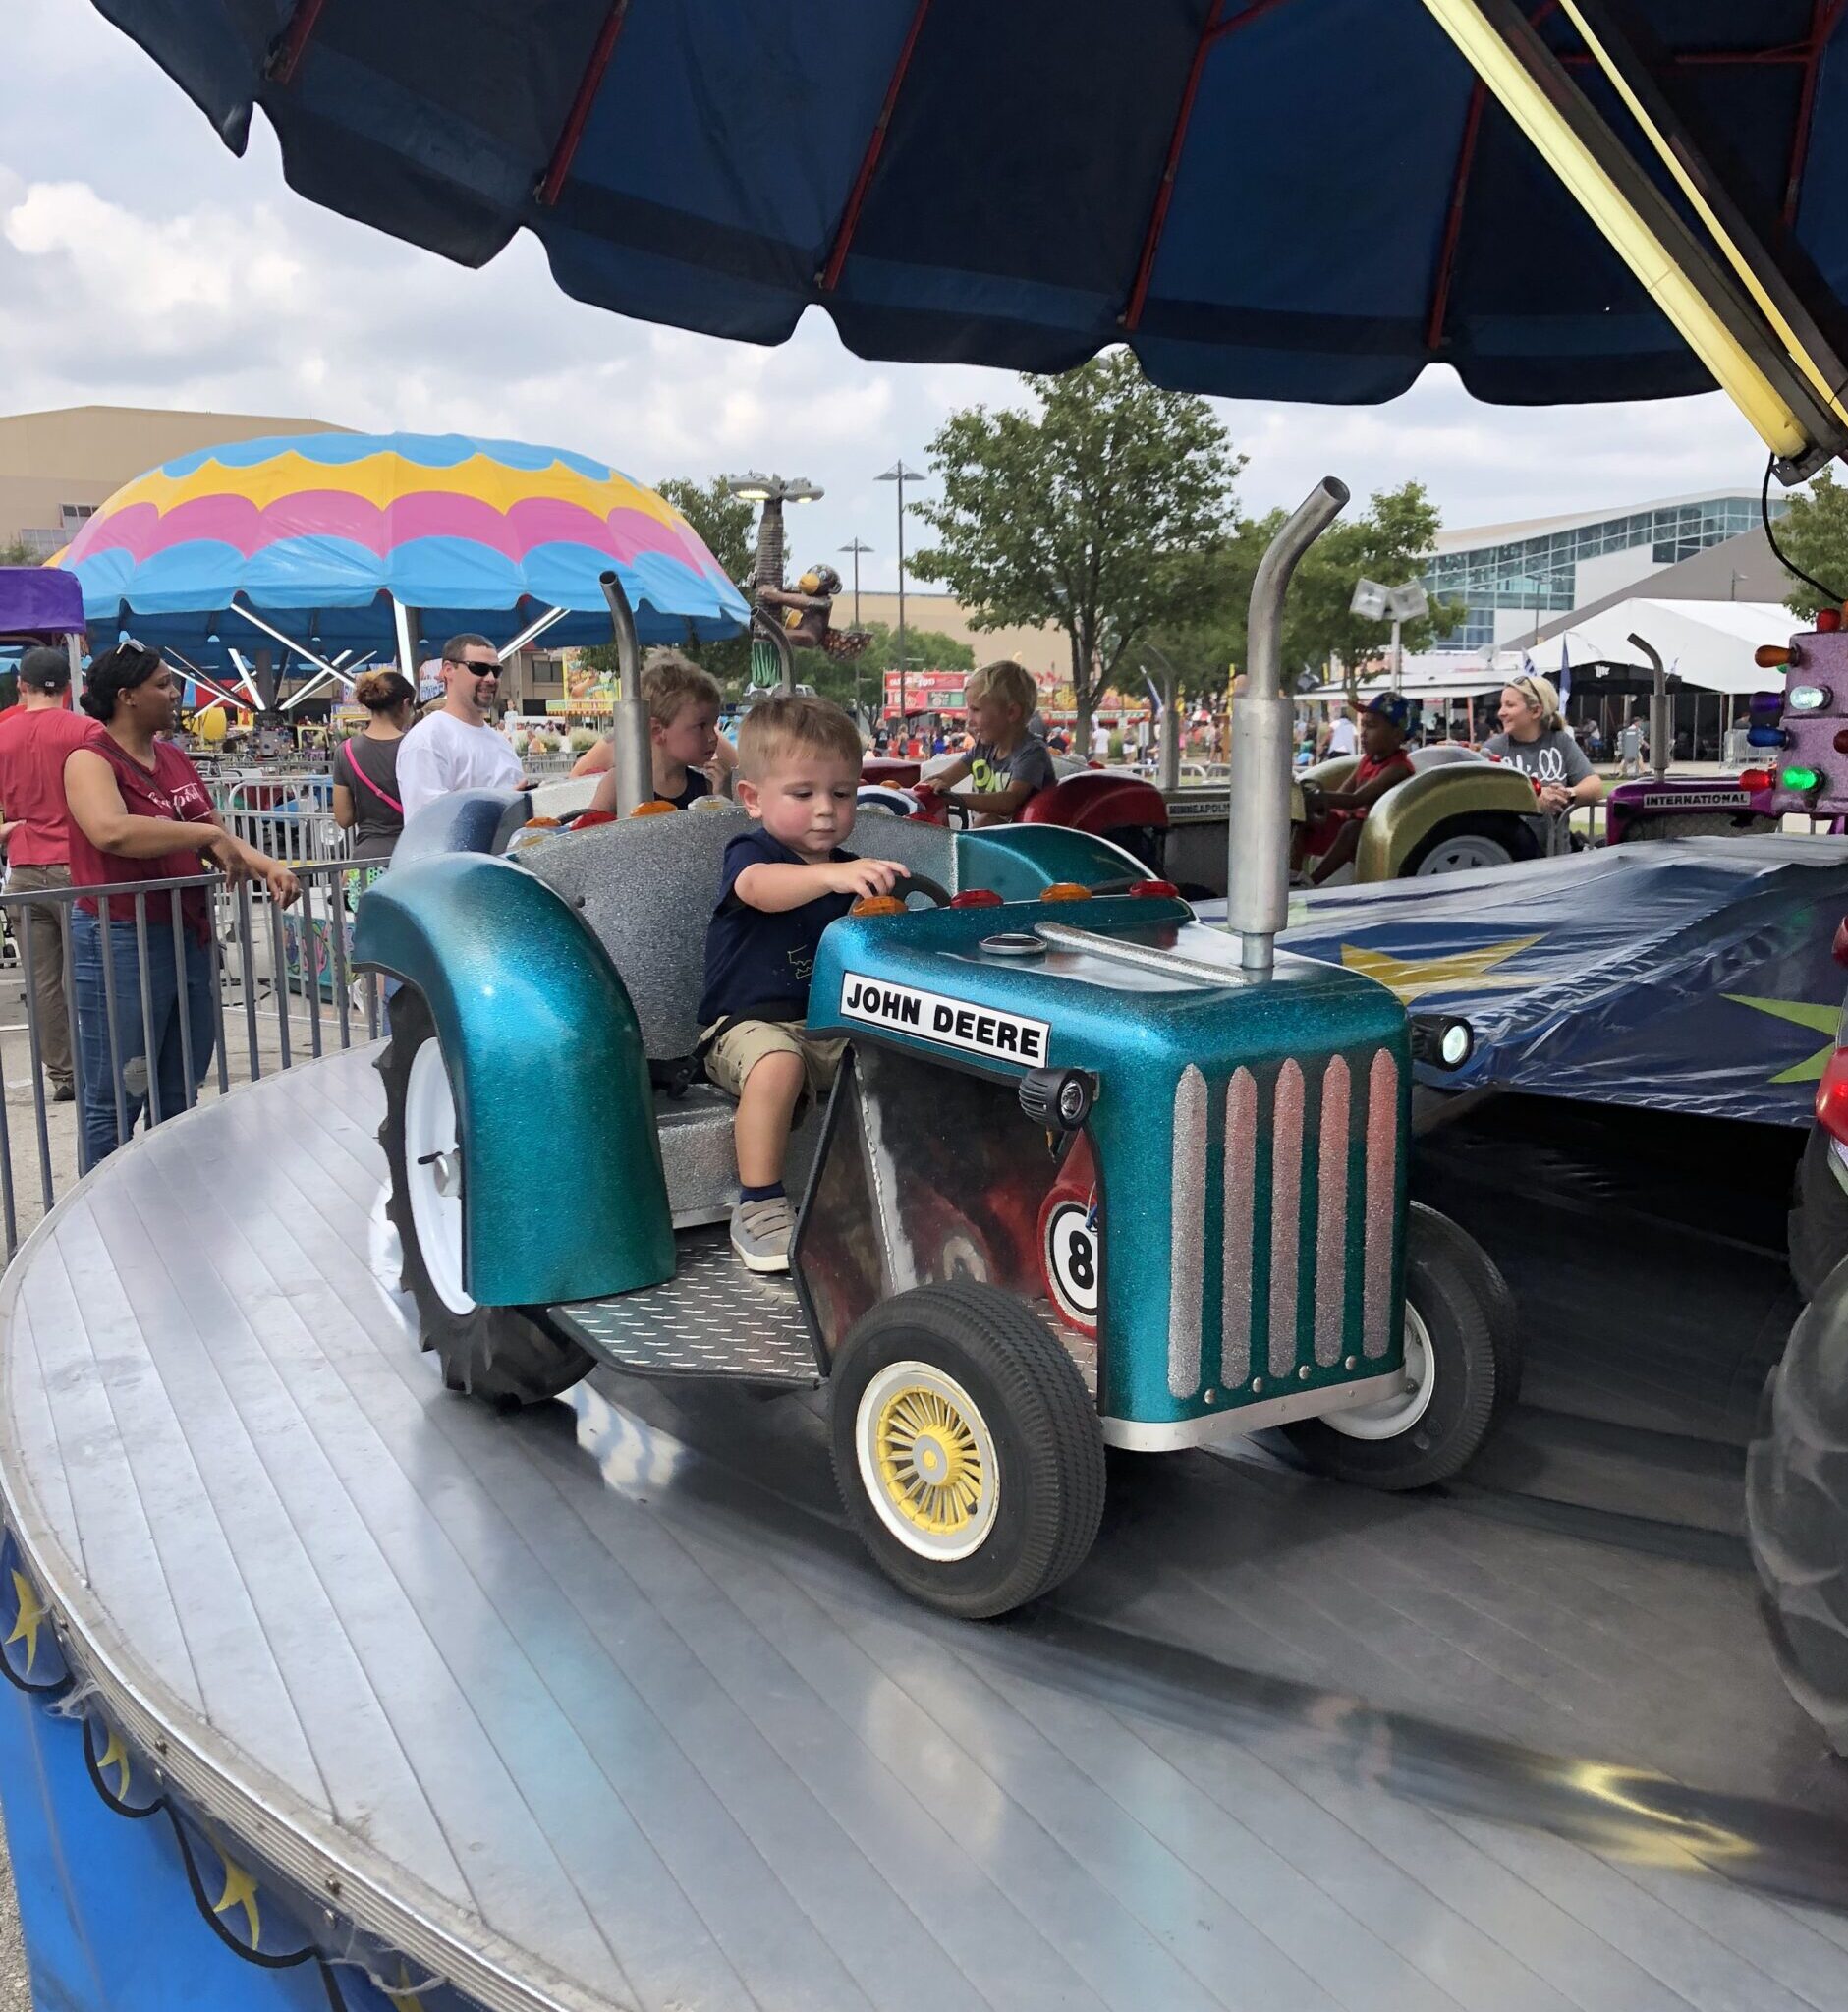 tips for visiting the Kentucky state fair